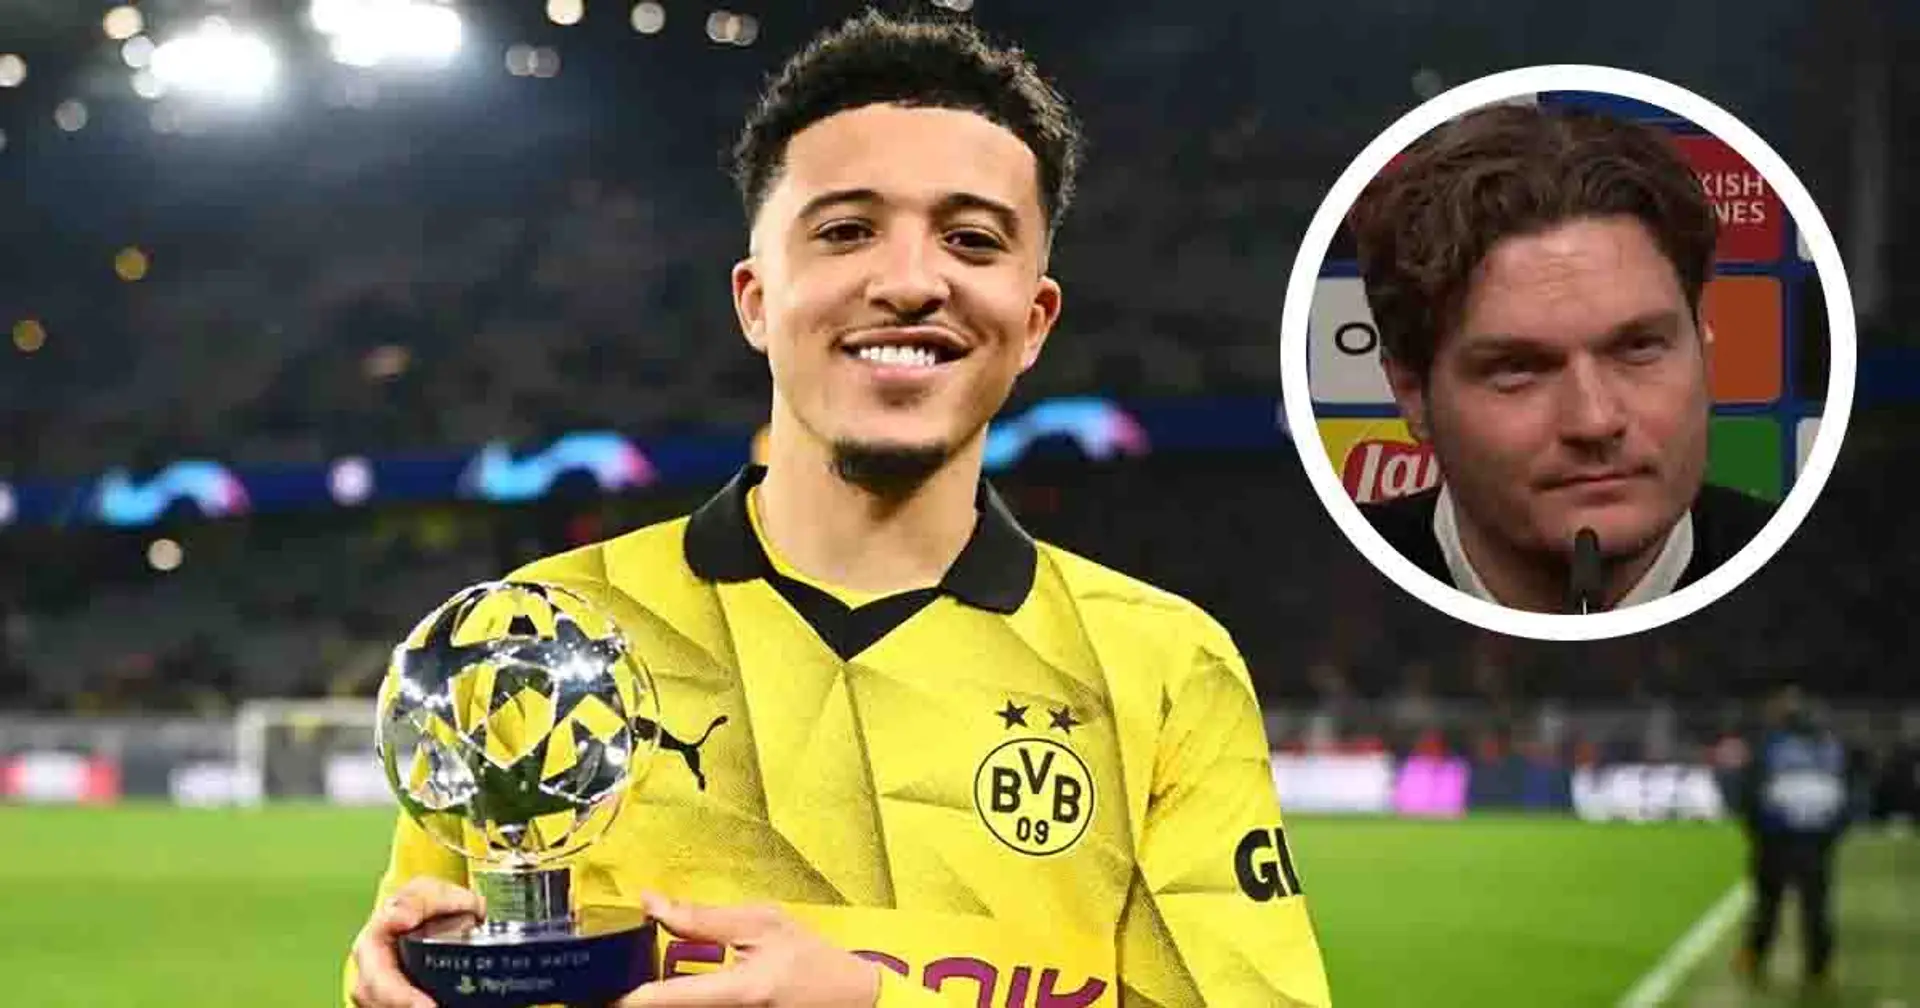 'A player that needs to smile': Borussia Dortmund coach gives verdict in Sancho after UCL heroics